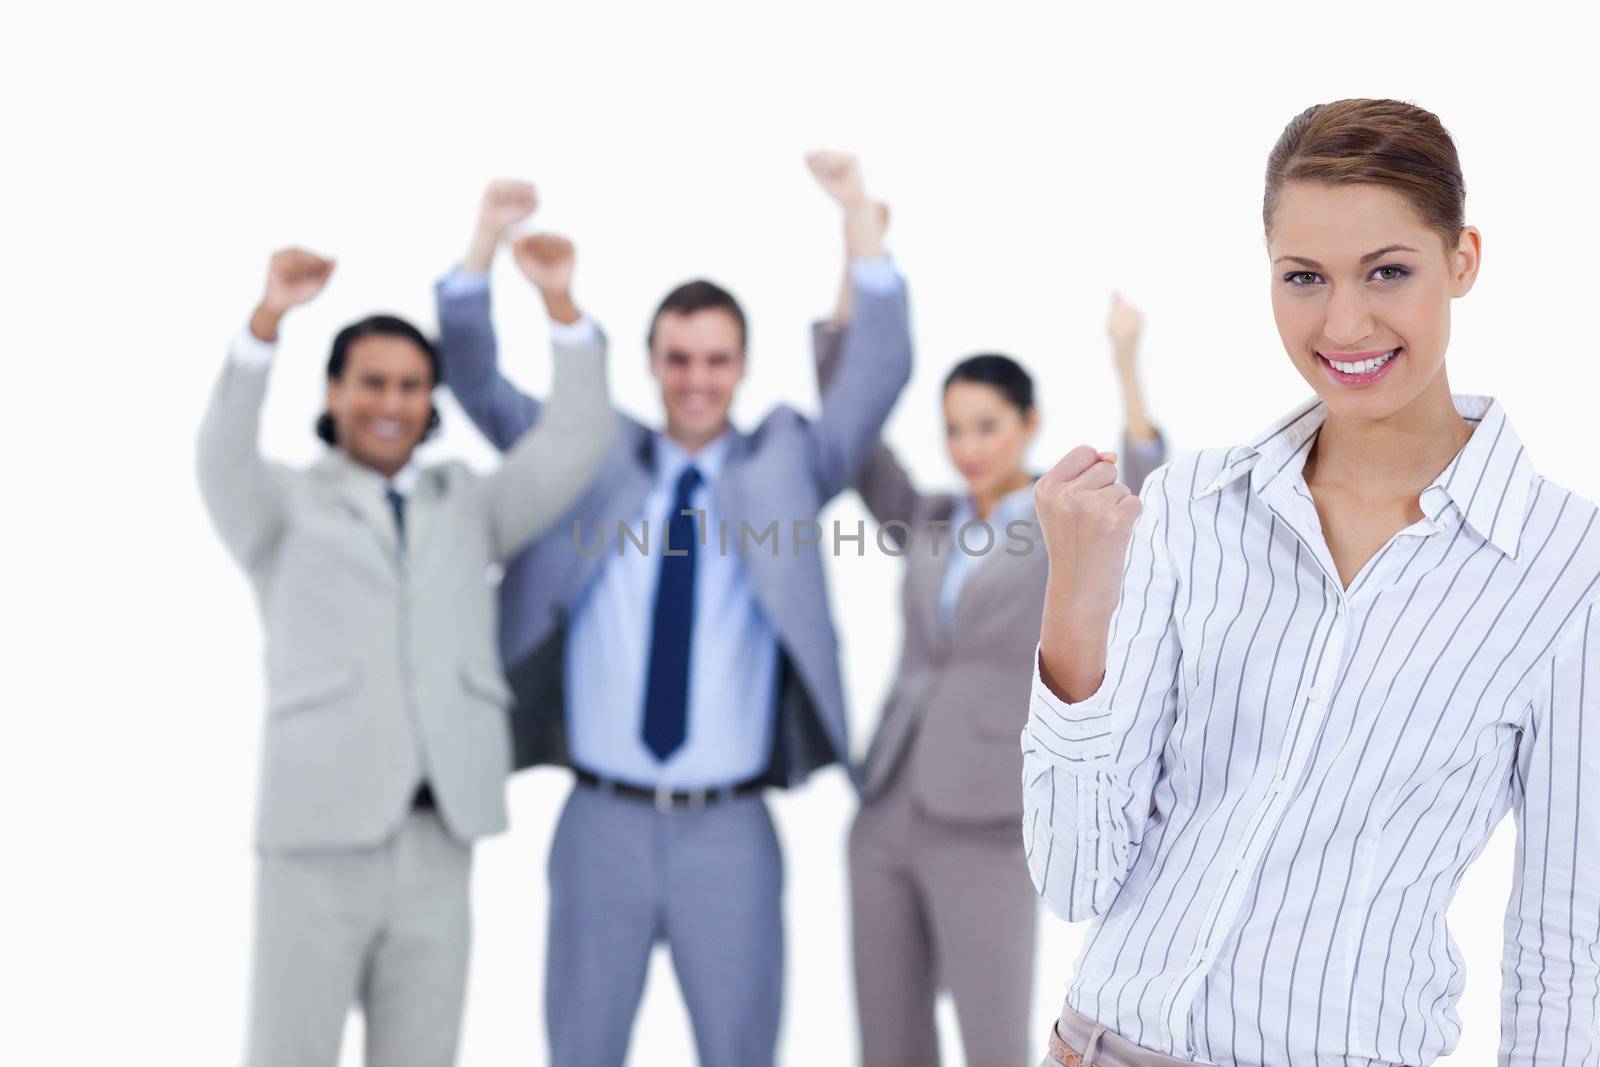 Close-up of a secretary smiling and clenching her fist with enthusiastic business people with their arms raised against white background